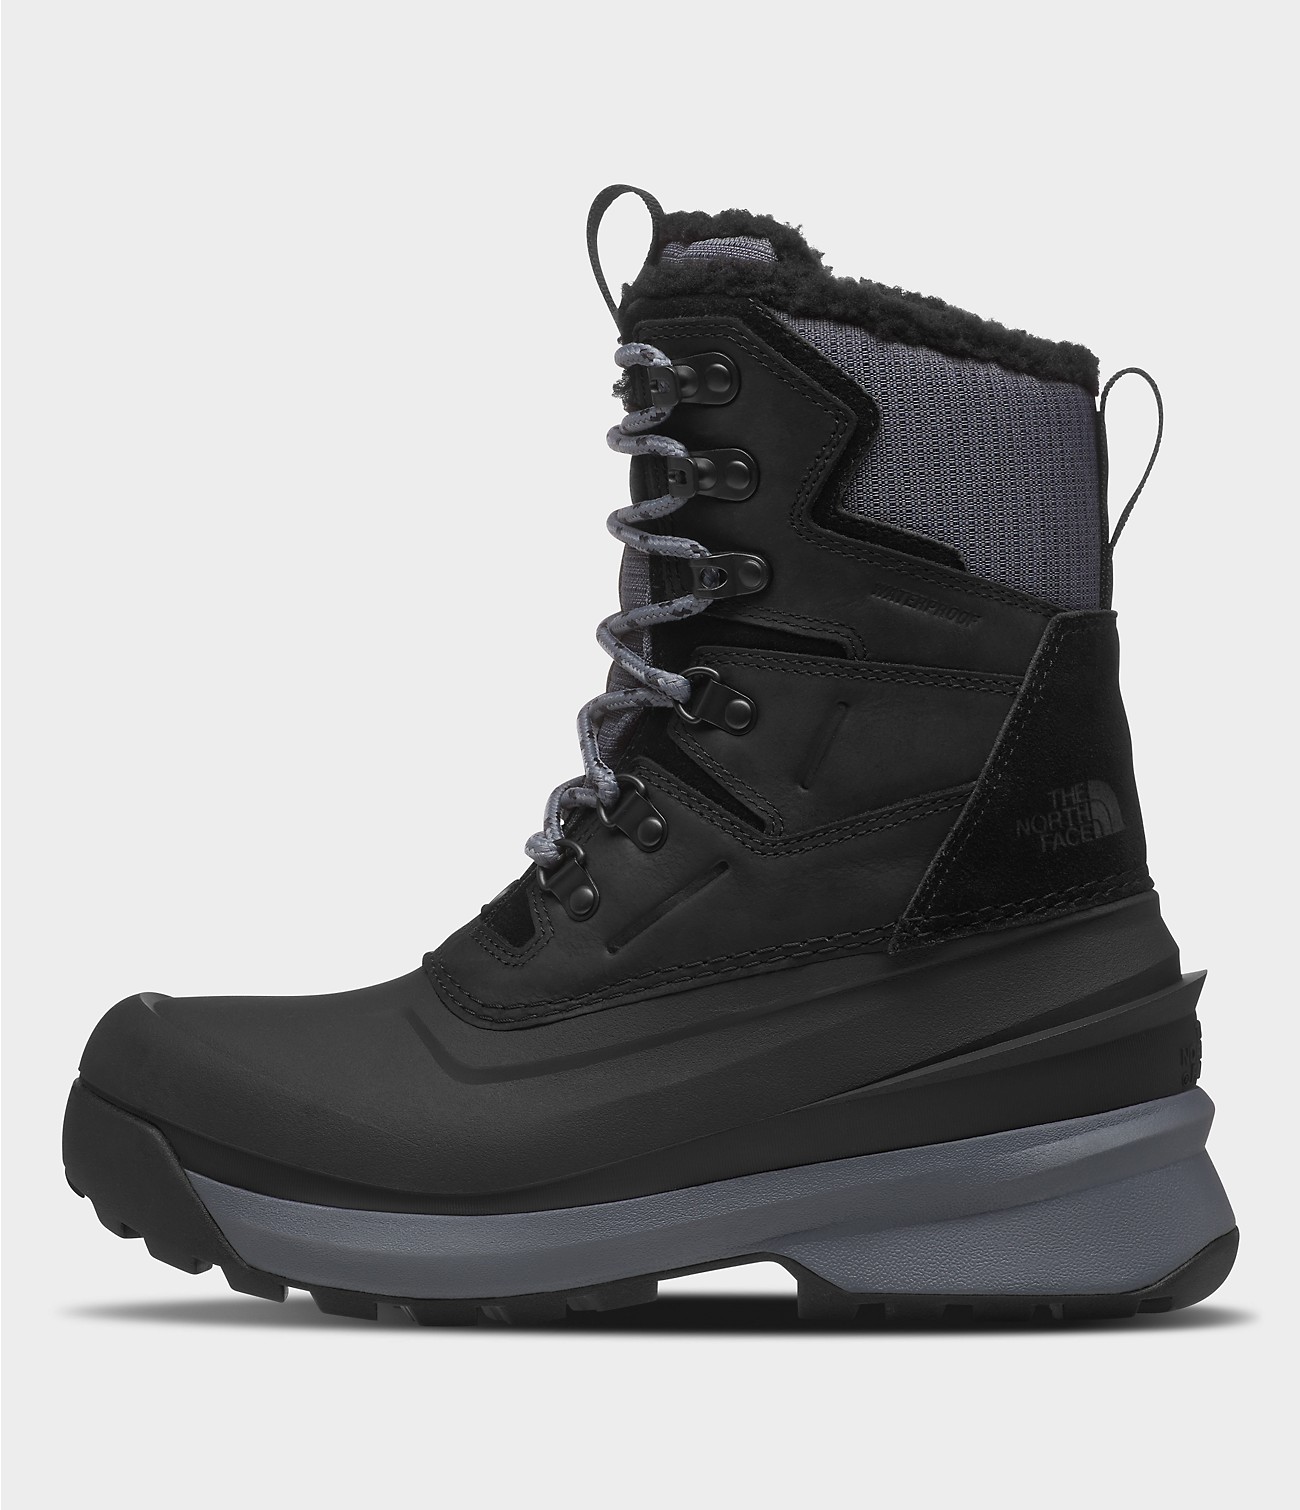 Unlock Wilderness' choice in the Keen Vs North Face comparison, the Chilkat V 400 Waterproof Boots by The North Face